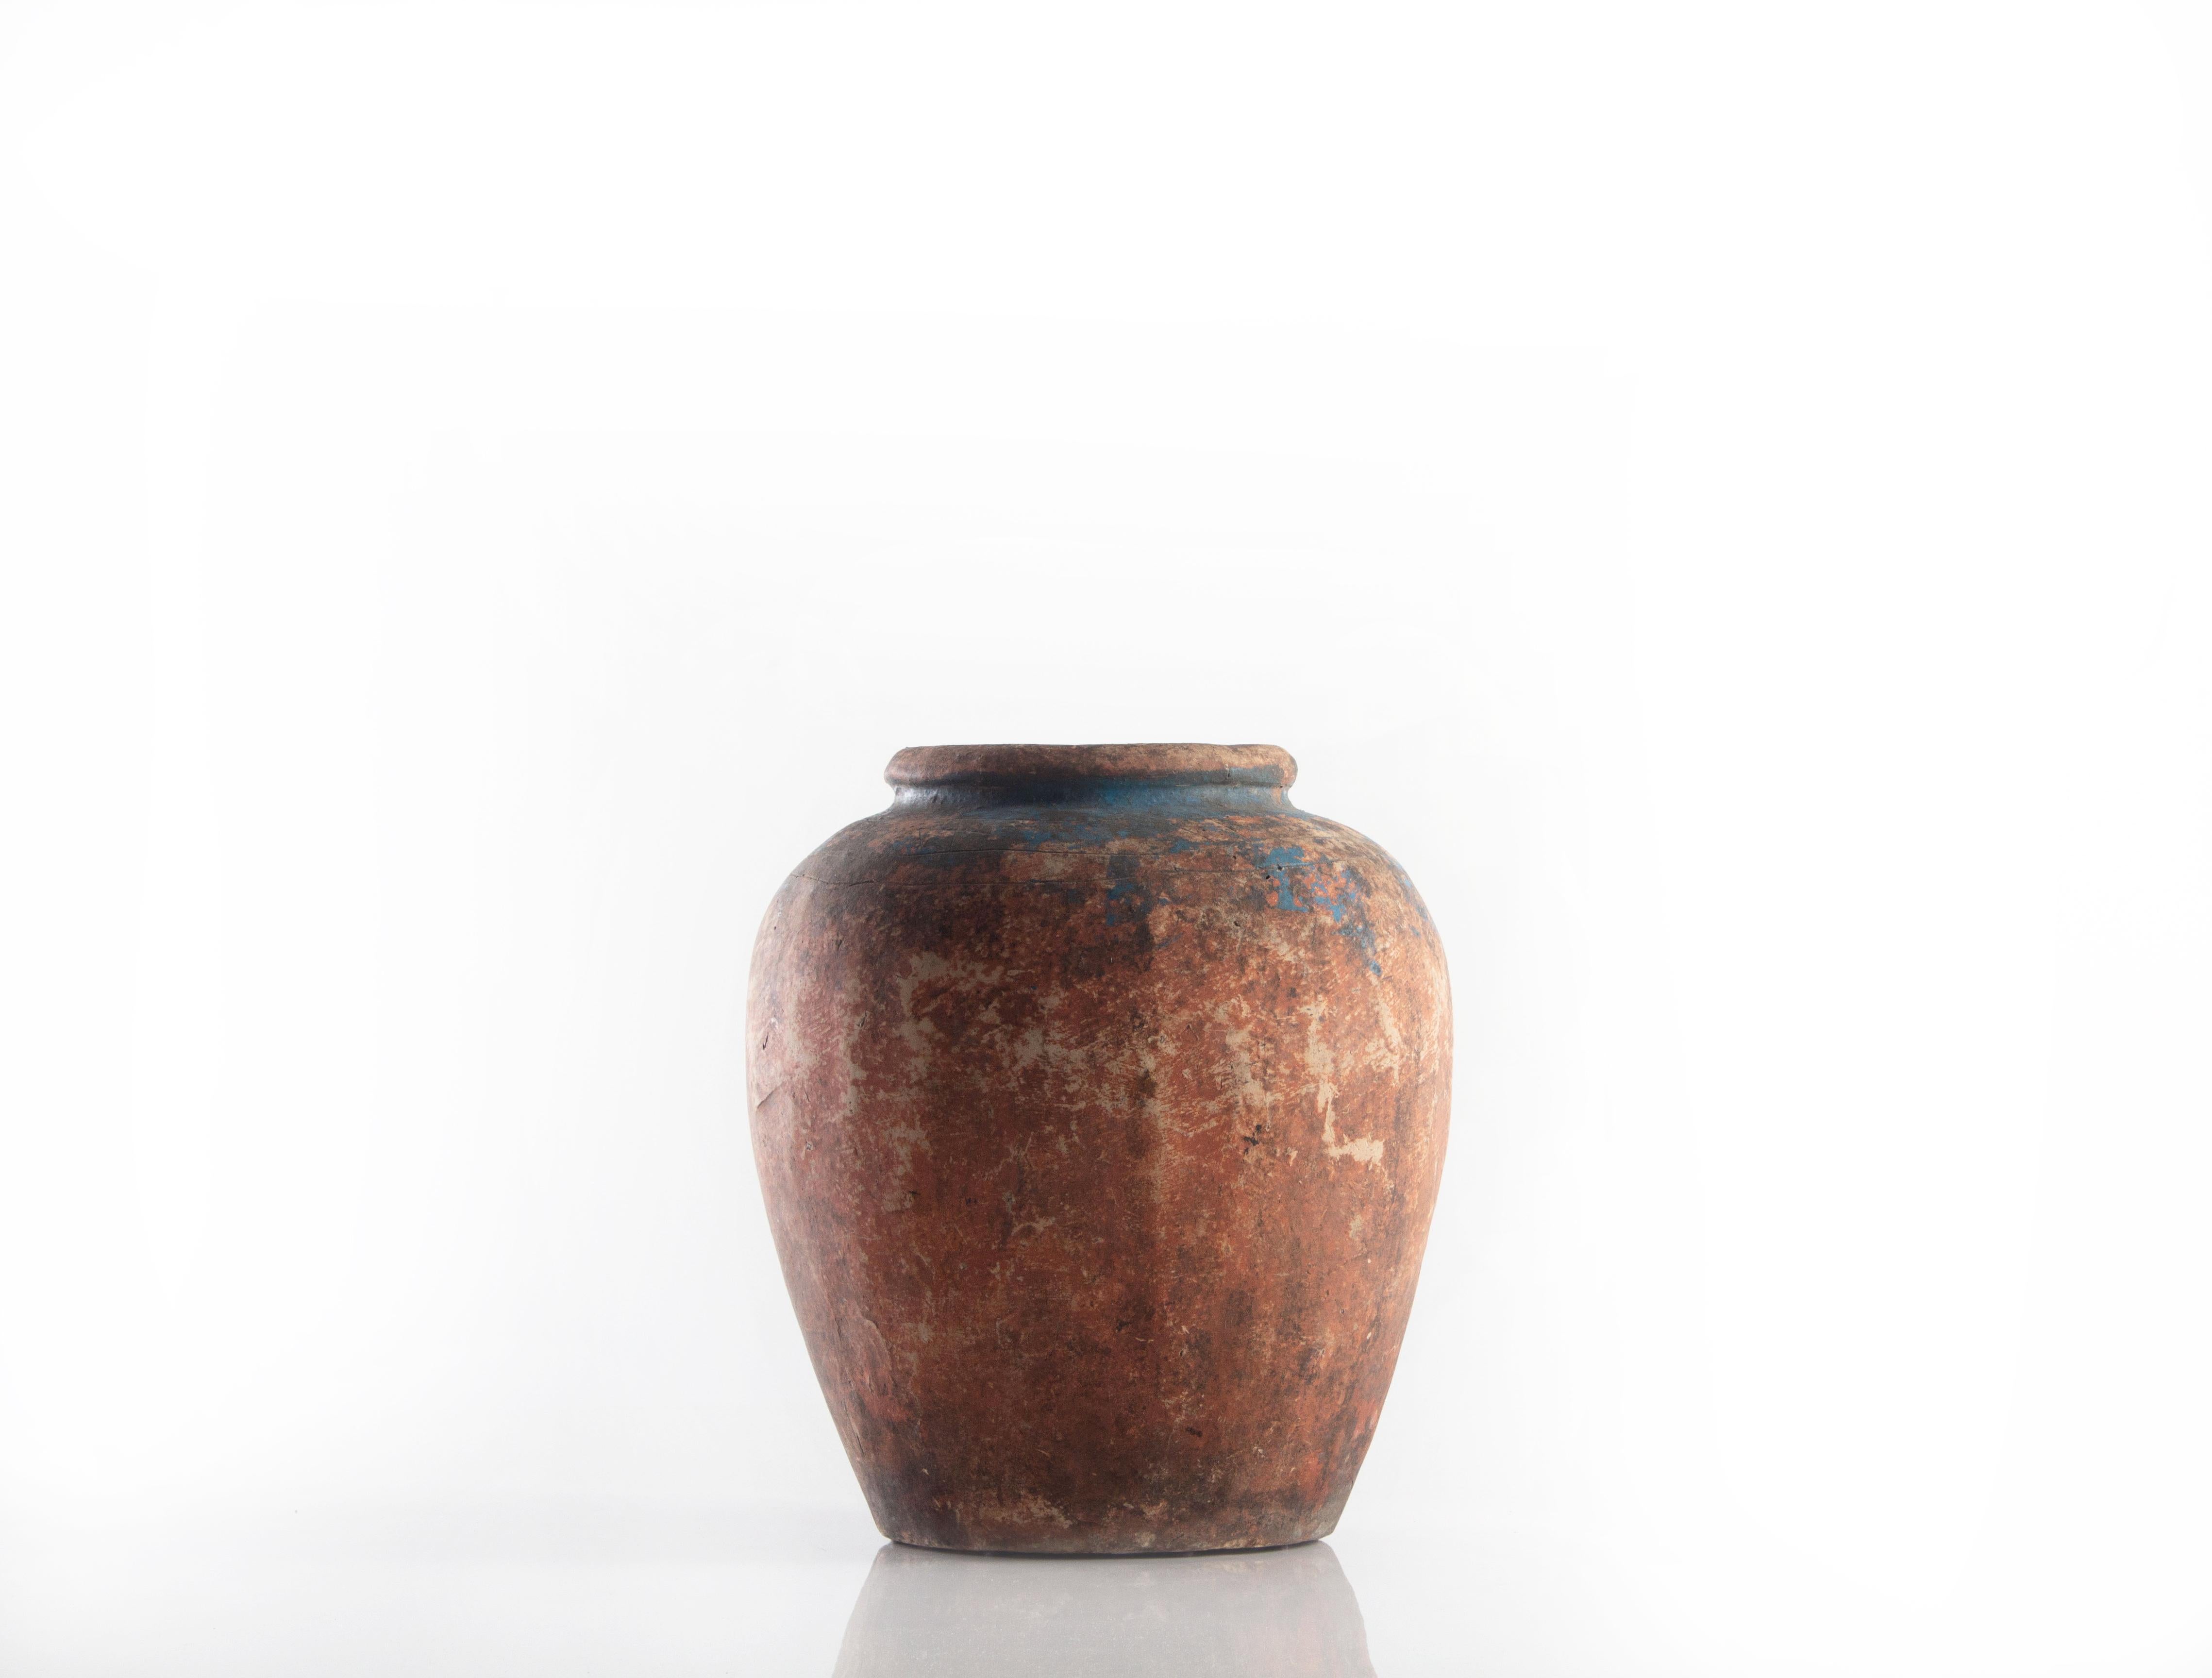 Vintage glazed South Asian terracotta storage jar.

All jars vary slightly from jar in picture. No 2 jars are identical.